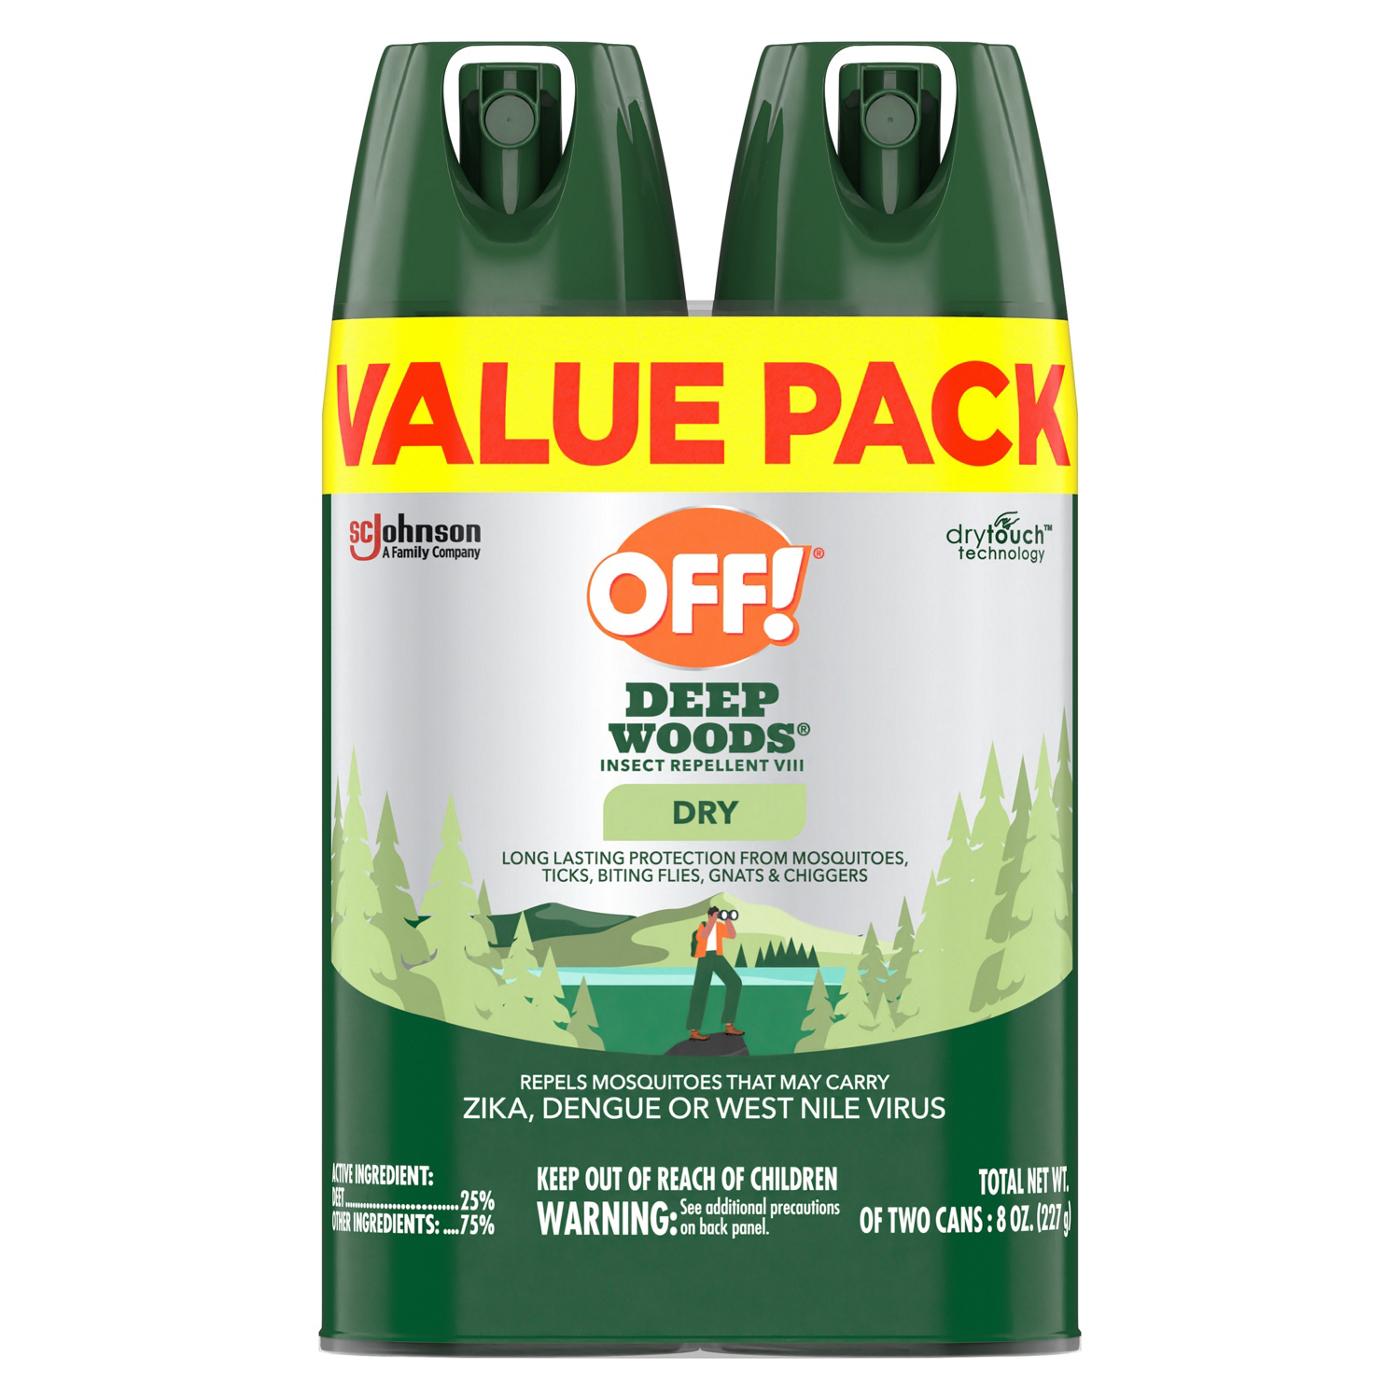 Off! Deep Woods Dry Insect Repellent VIII, 2 Pk; image 1 of 2